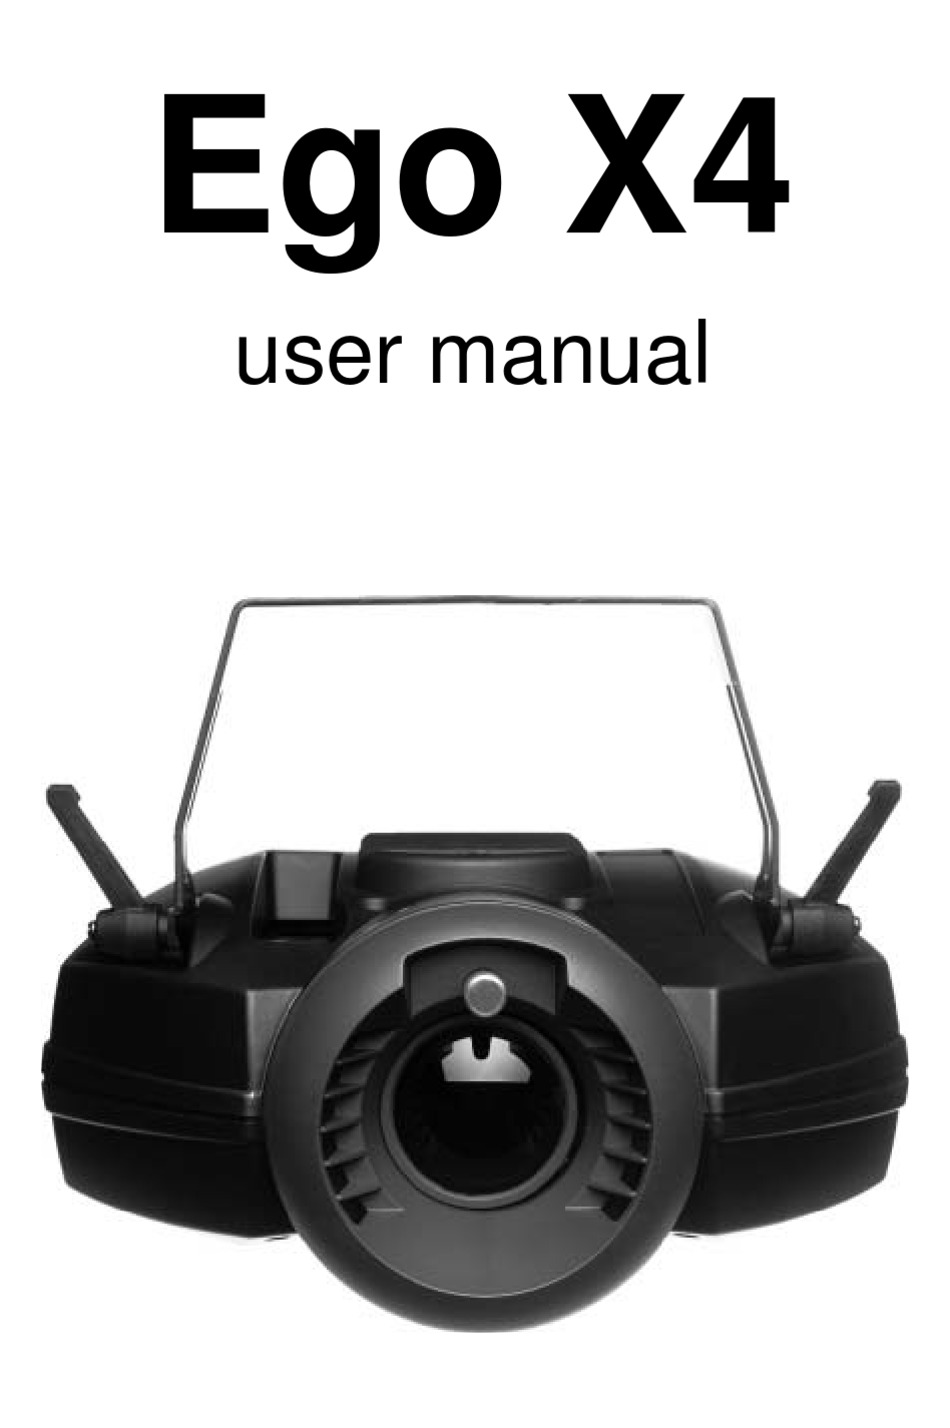 User manual Martin Ego X4 (English - 44 pages)